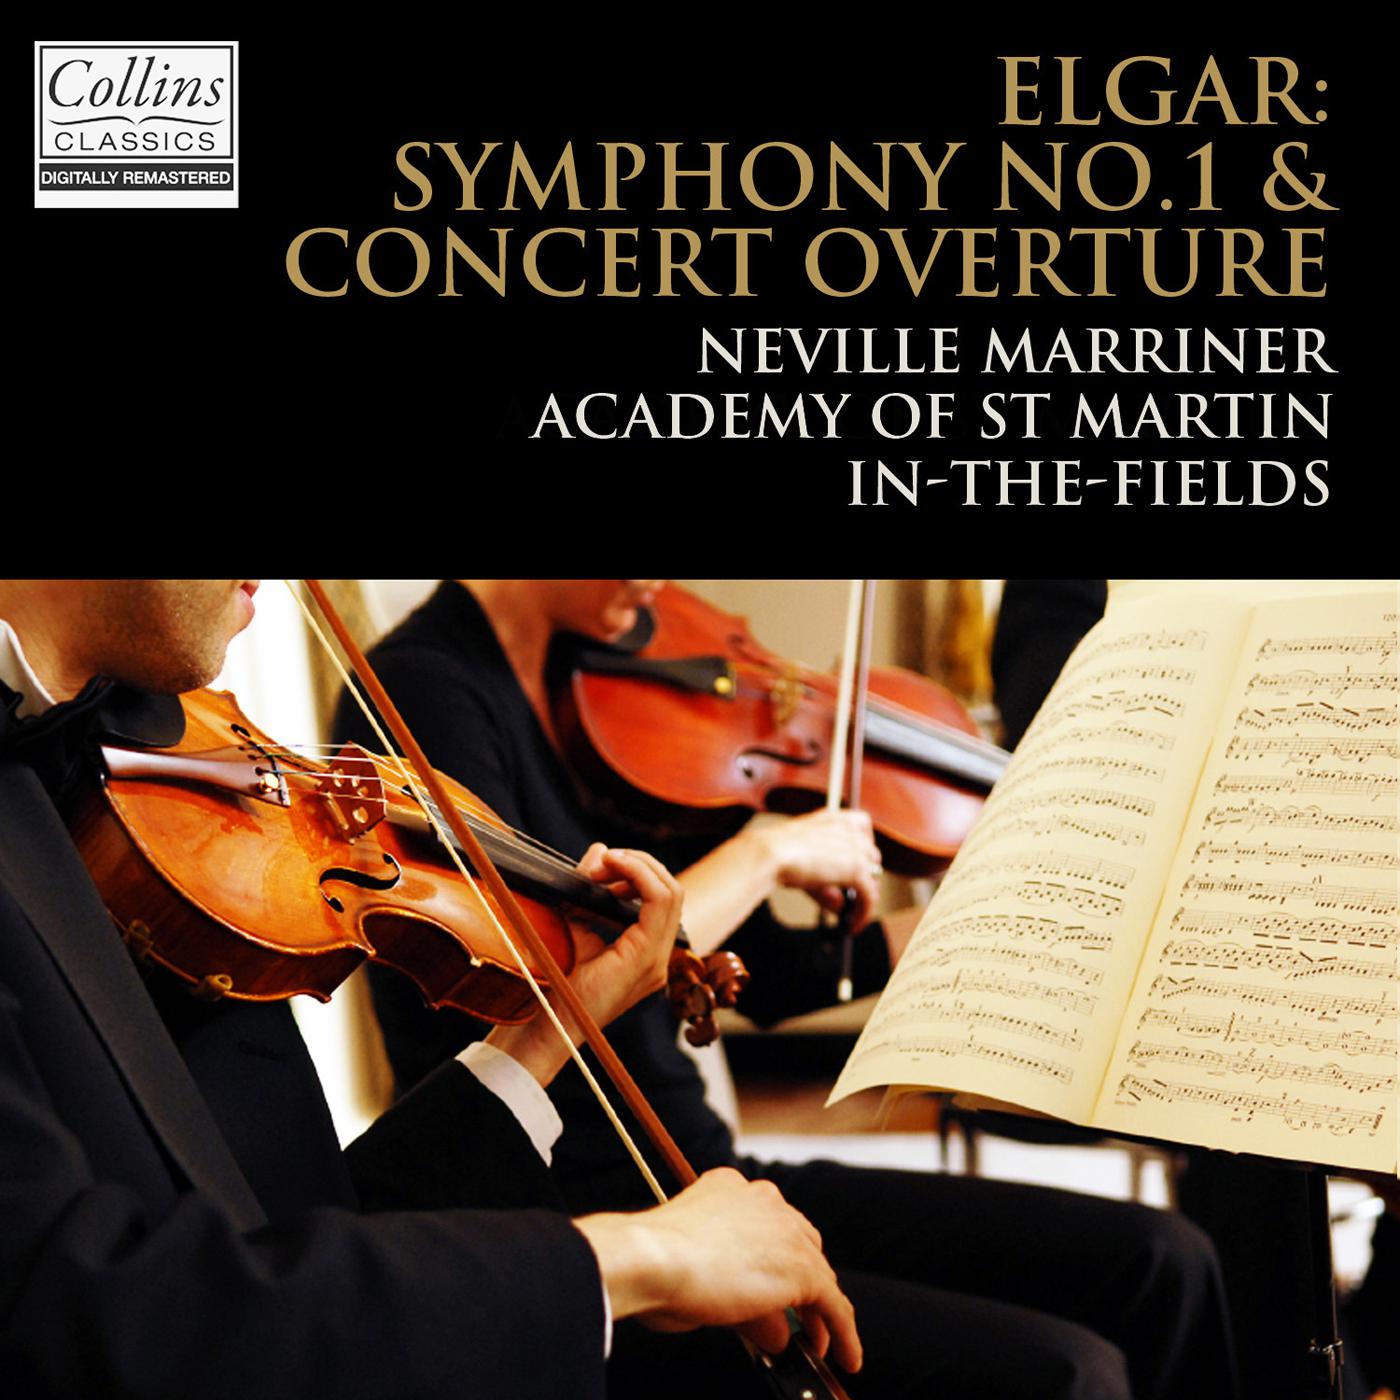 Elgar: In the South Overture - Symphony No. 1